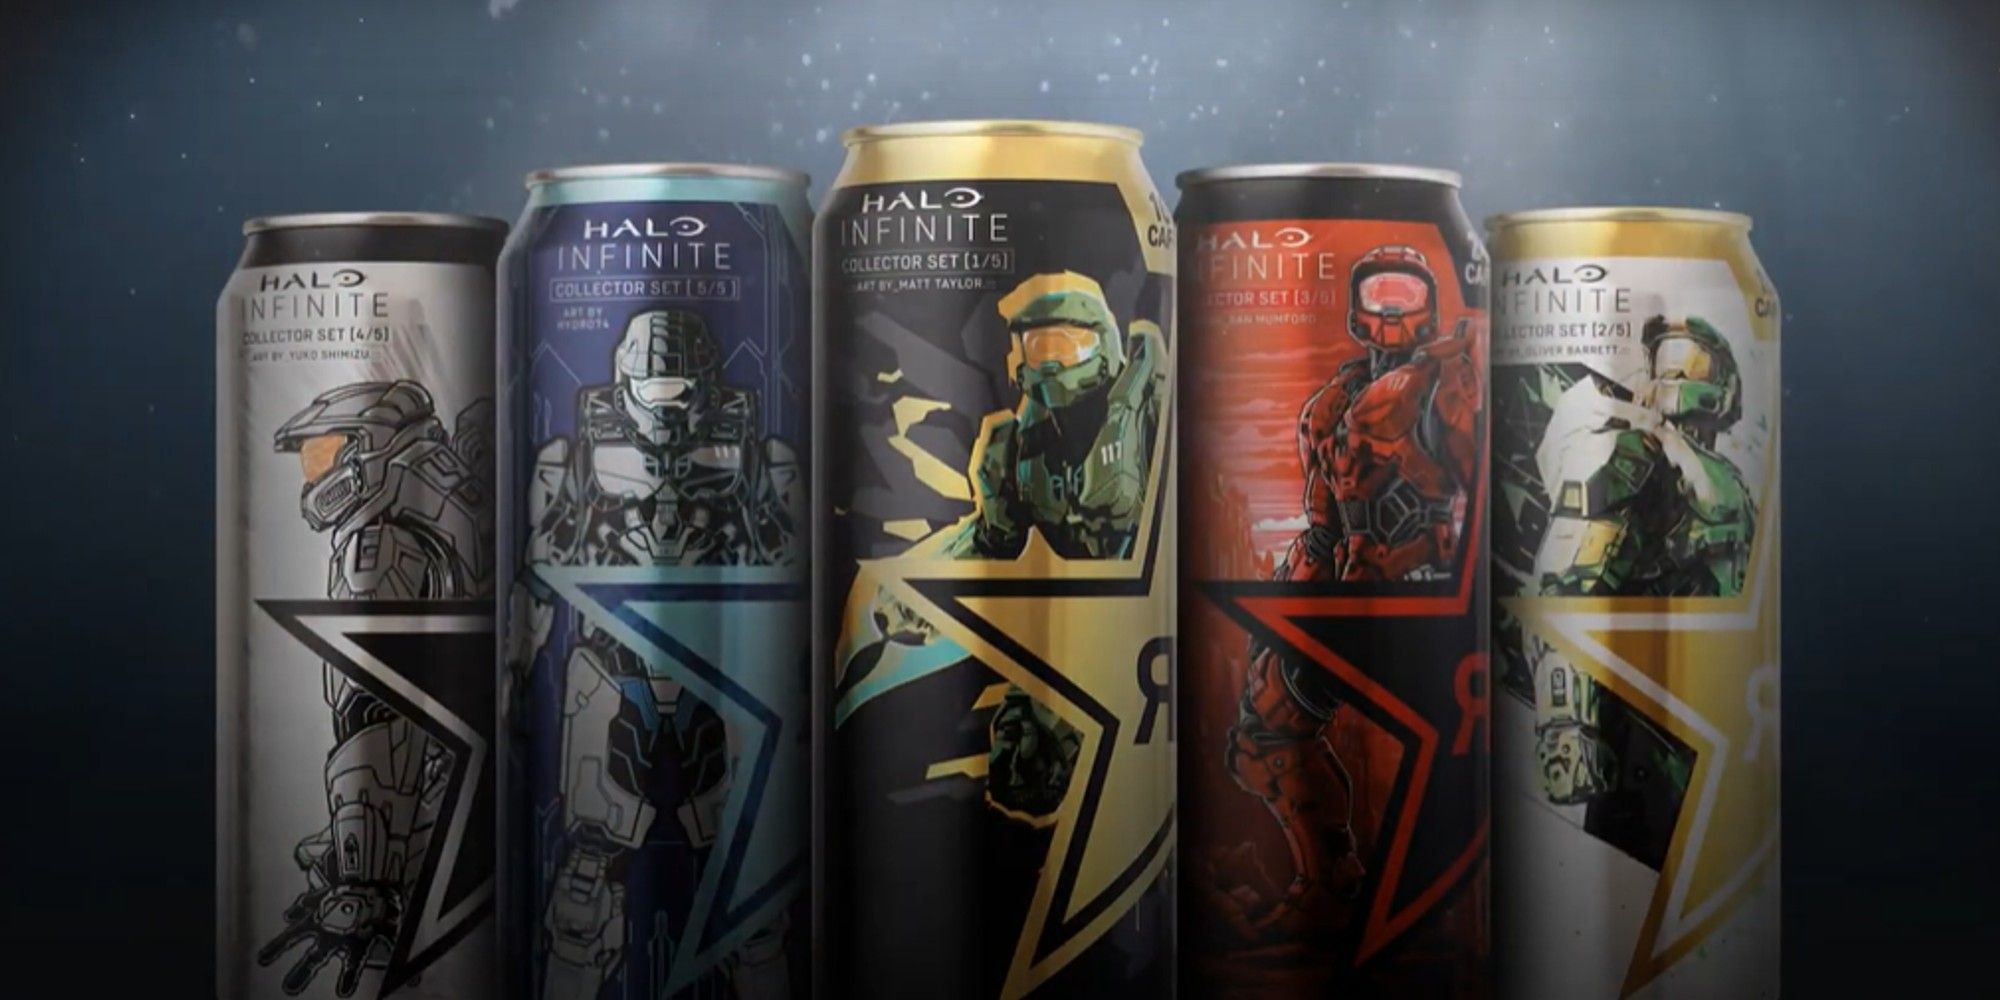 Halo Infinite Rockstar Energy Drinks Unlock Cosmetics and Double XP, Now  Available for Purchase - Game Informer